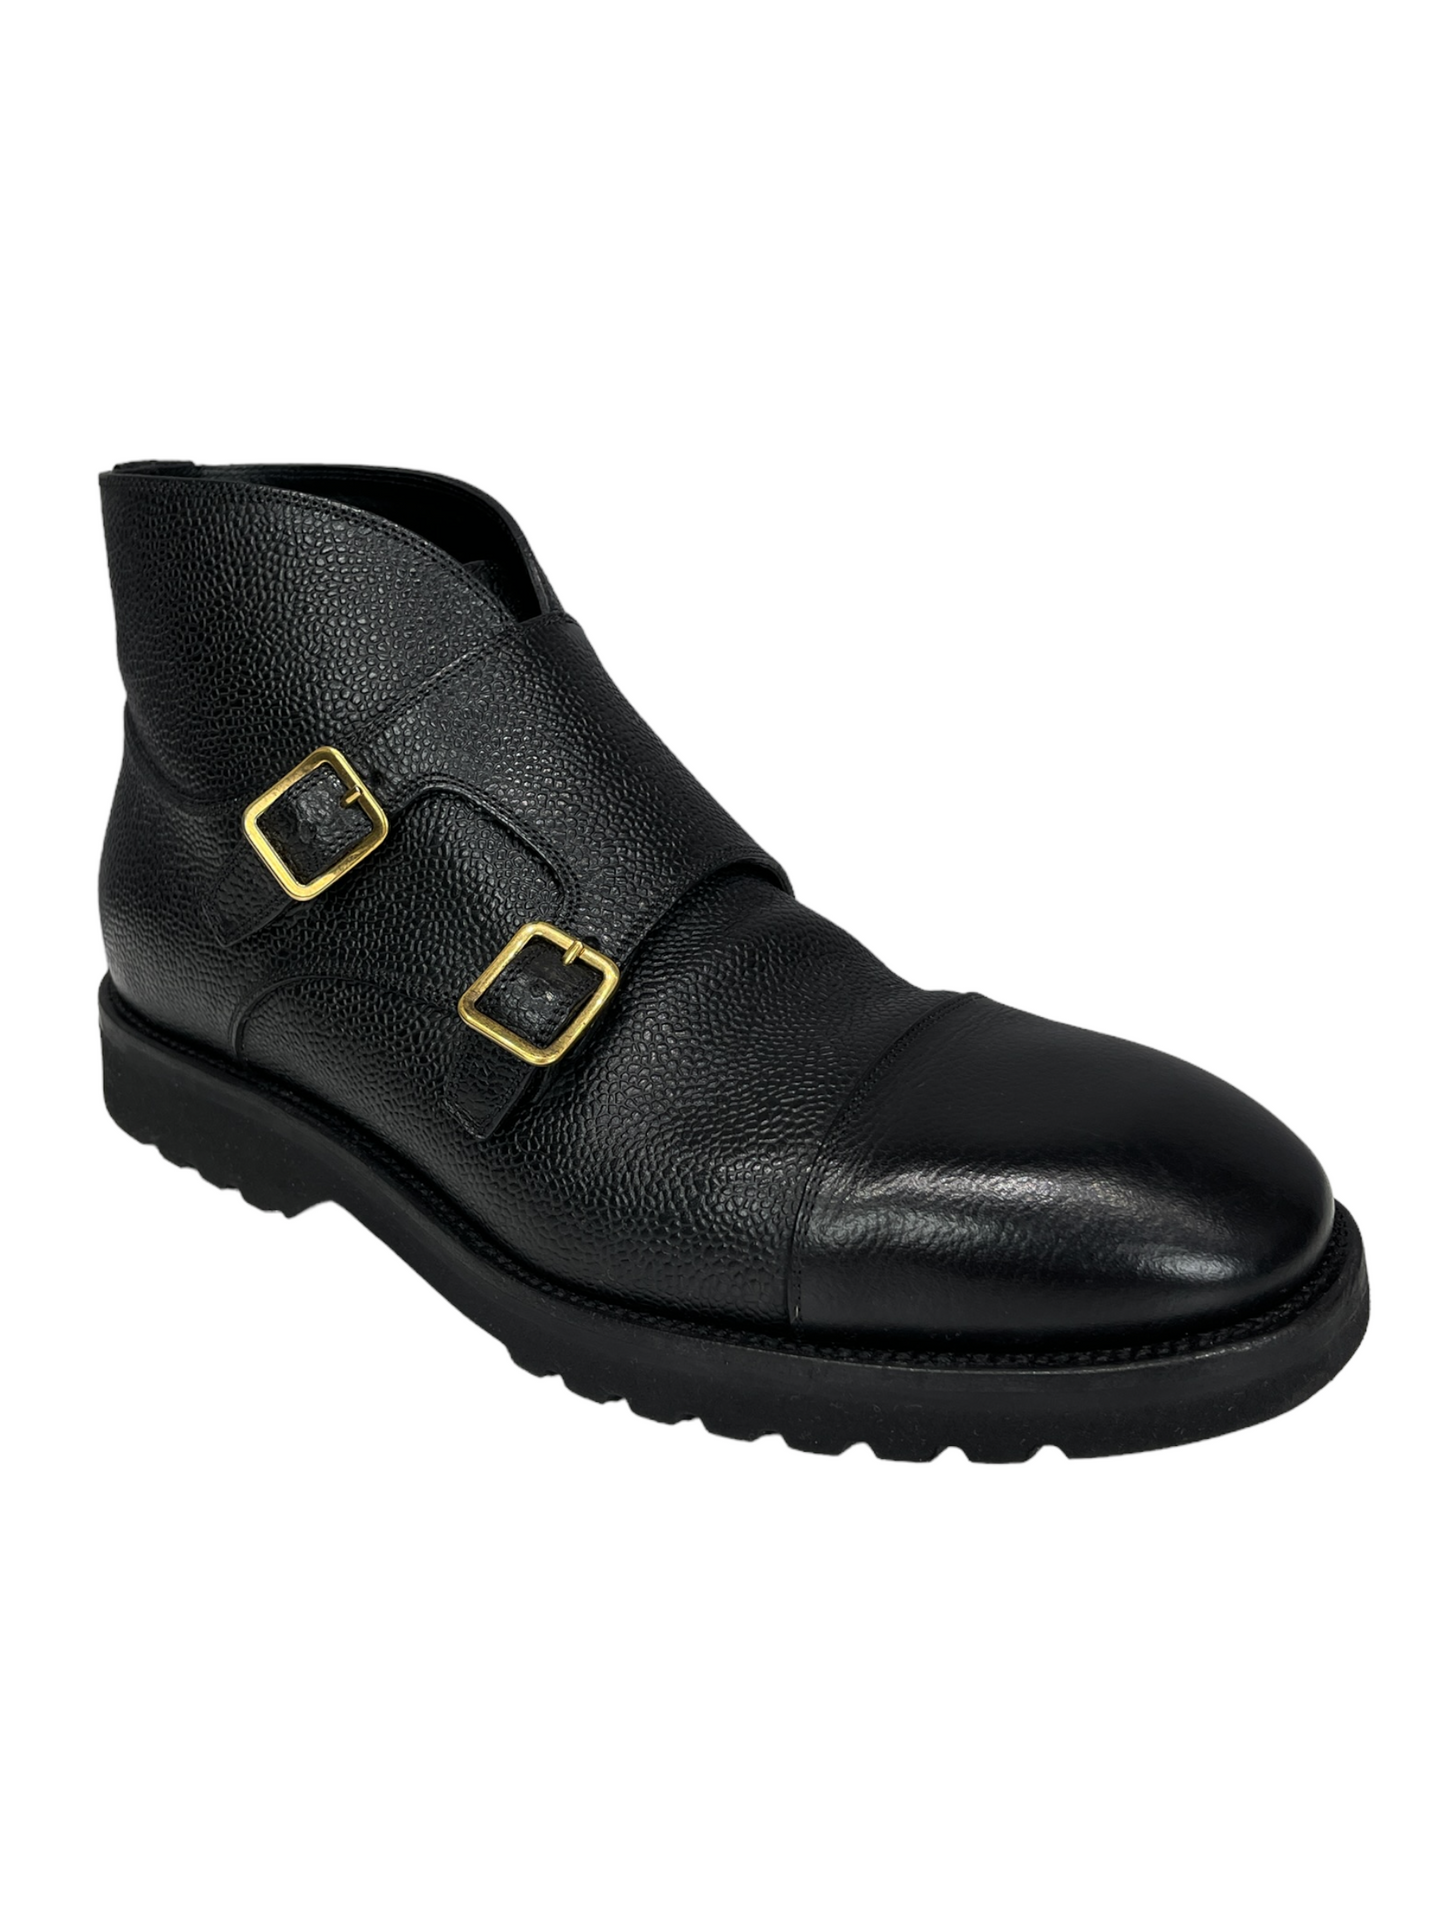 Tom Ford Black Pebbled Leather Strap Low Top Boot 7- Genuine Design Luxury Consignment Calgary, Alberta, Canada New and Pre-Owned Clothing, Shoes, Accessories.